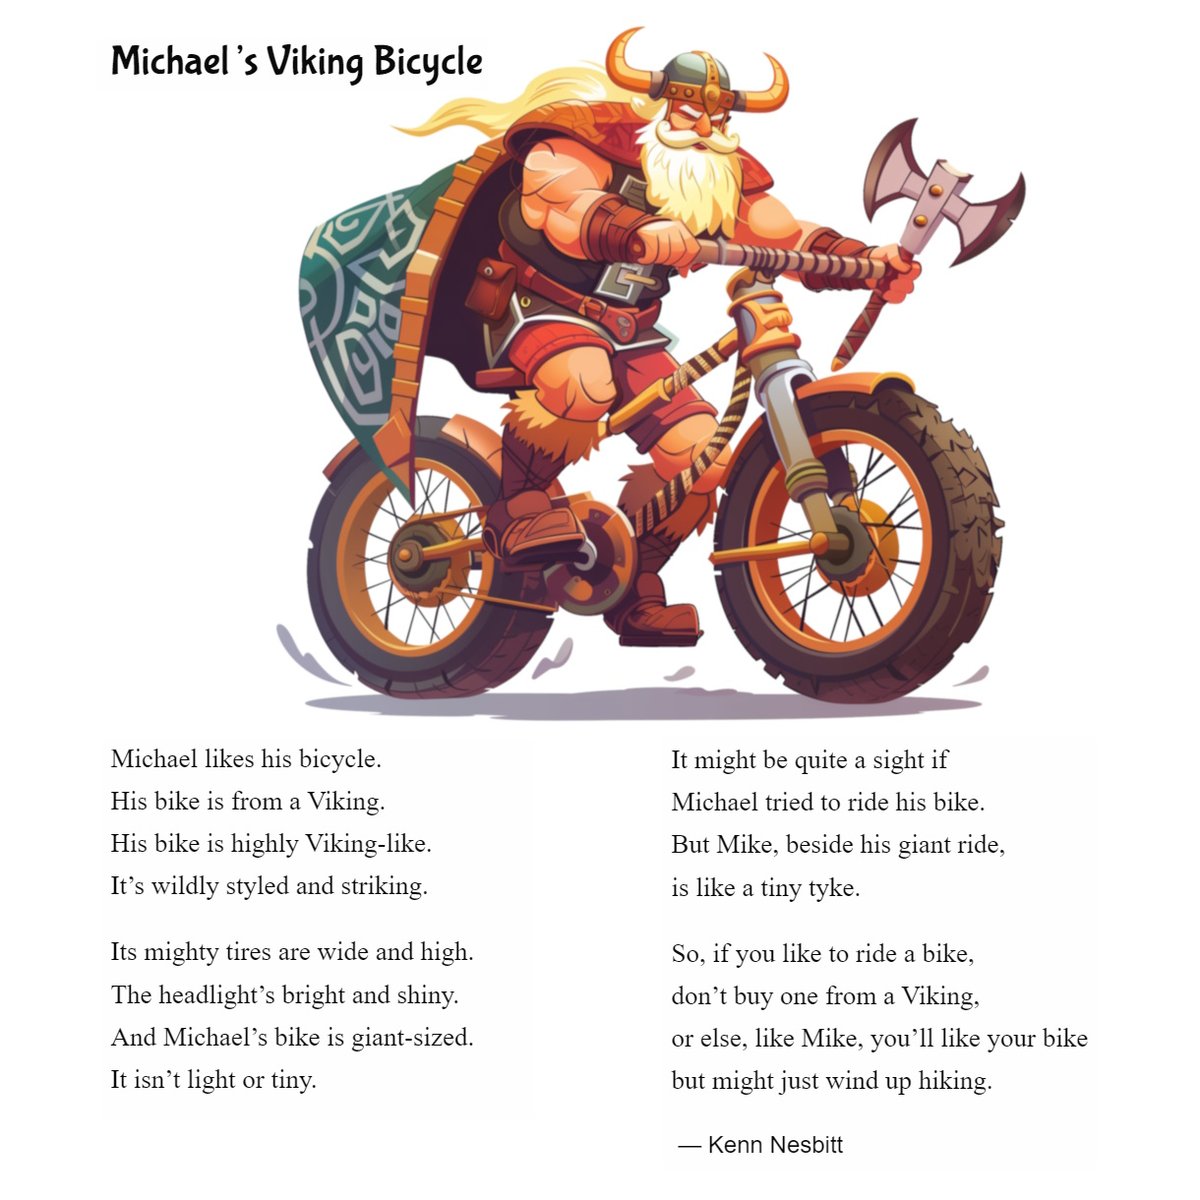 New funny tongue-twister poem for kids: 'Michael's Viking Bicycle' poetry4kids.com/poems/michaels… #tonguetwister #vikingpoem #bicyclepoem #childrenspoetry #poetry4kids